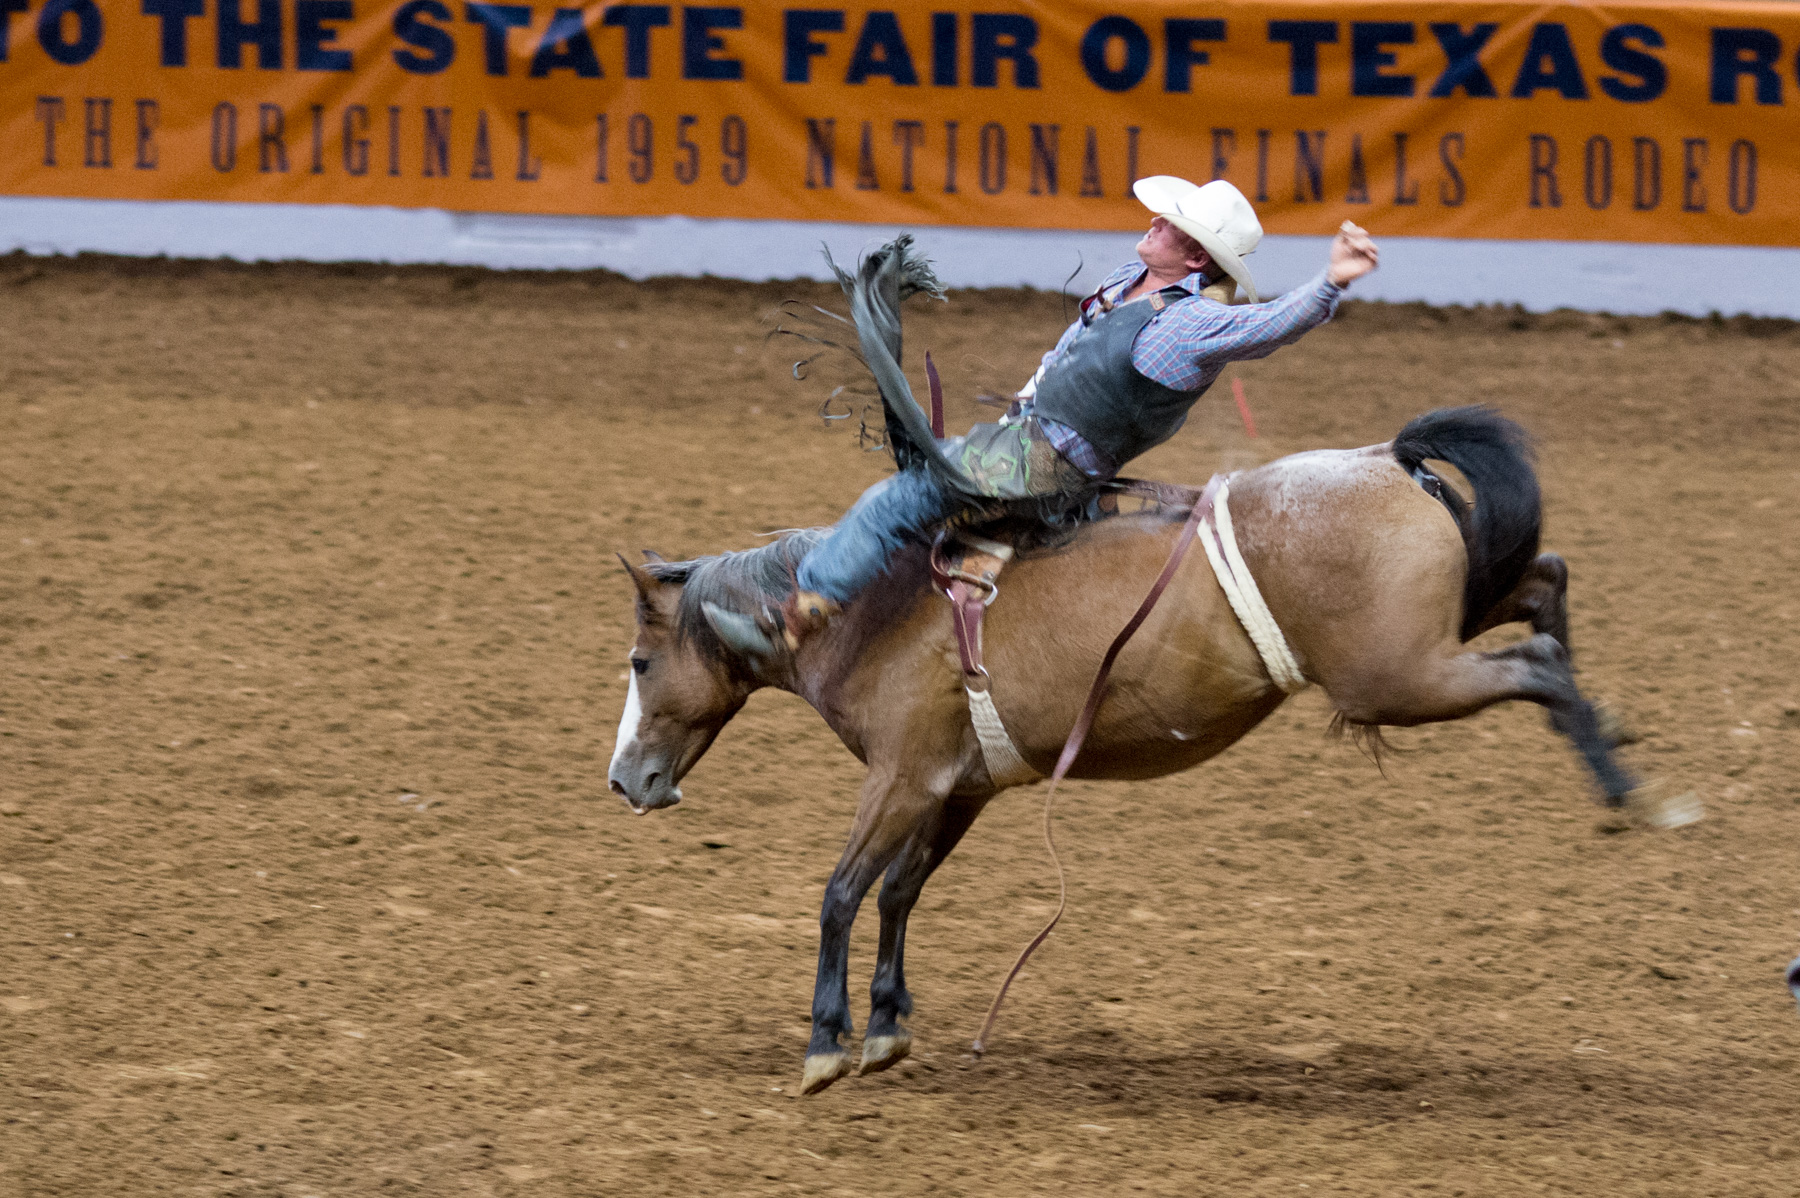 Gallery: A Wild Ride at the State Fair of Texas Rodeo - D Magazine